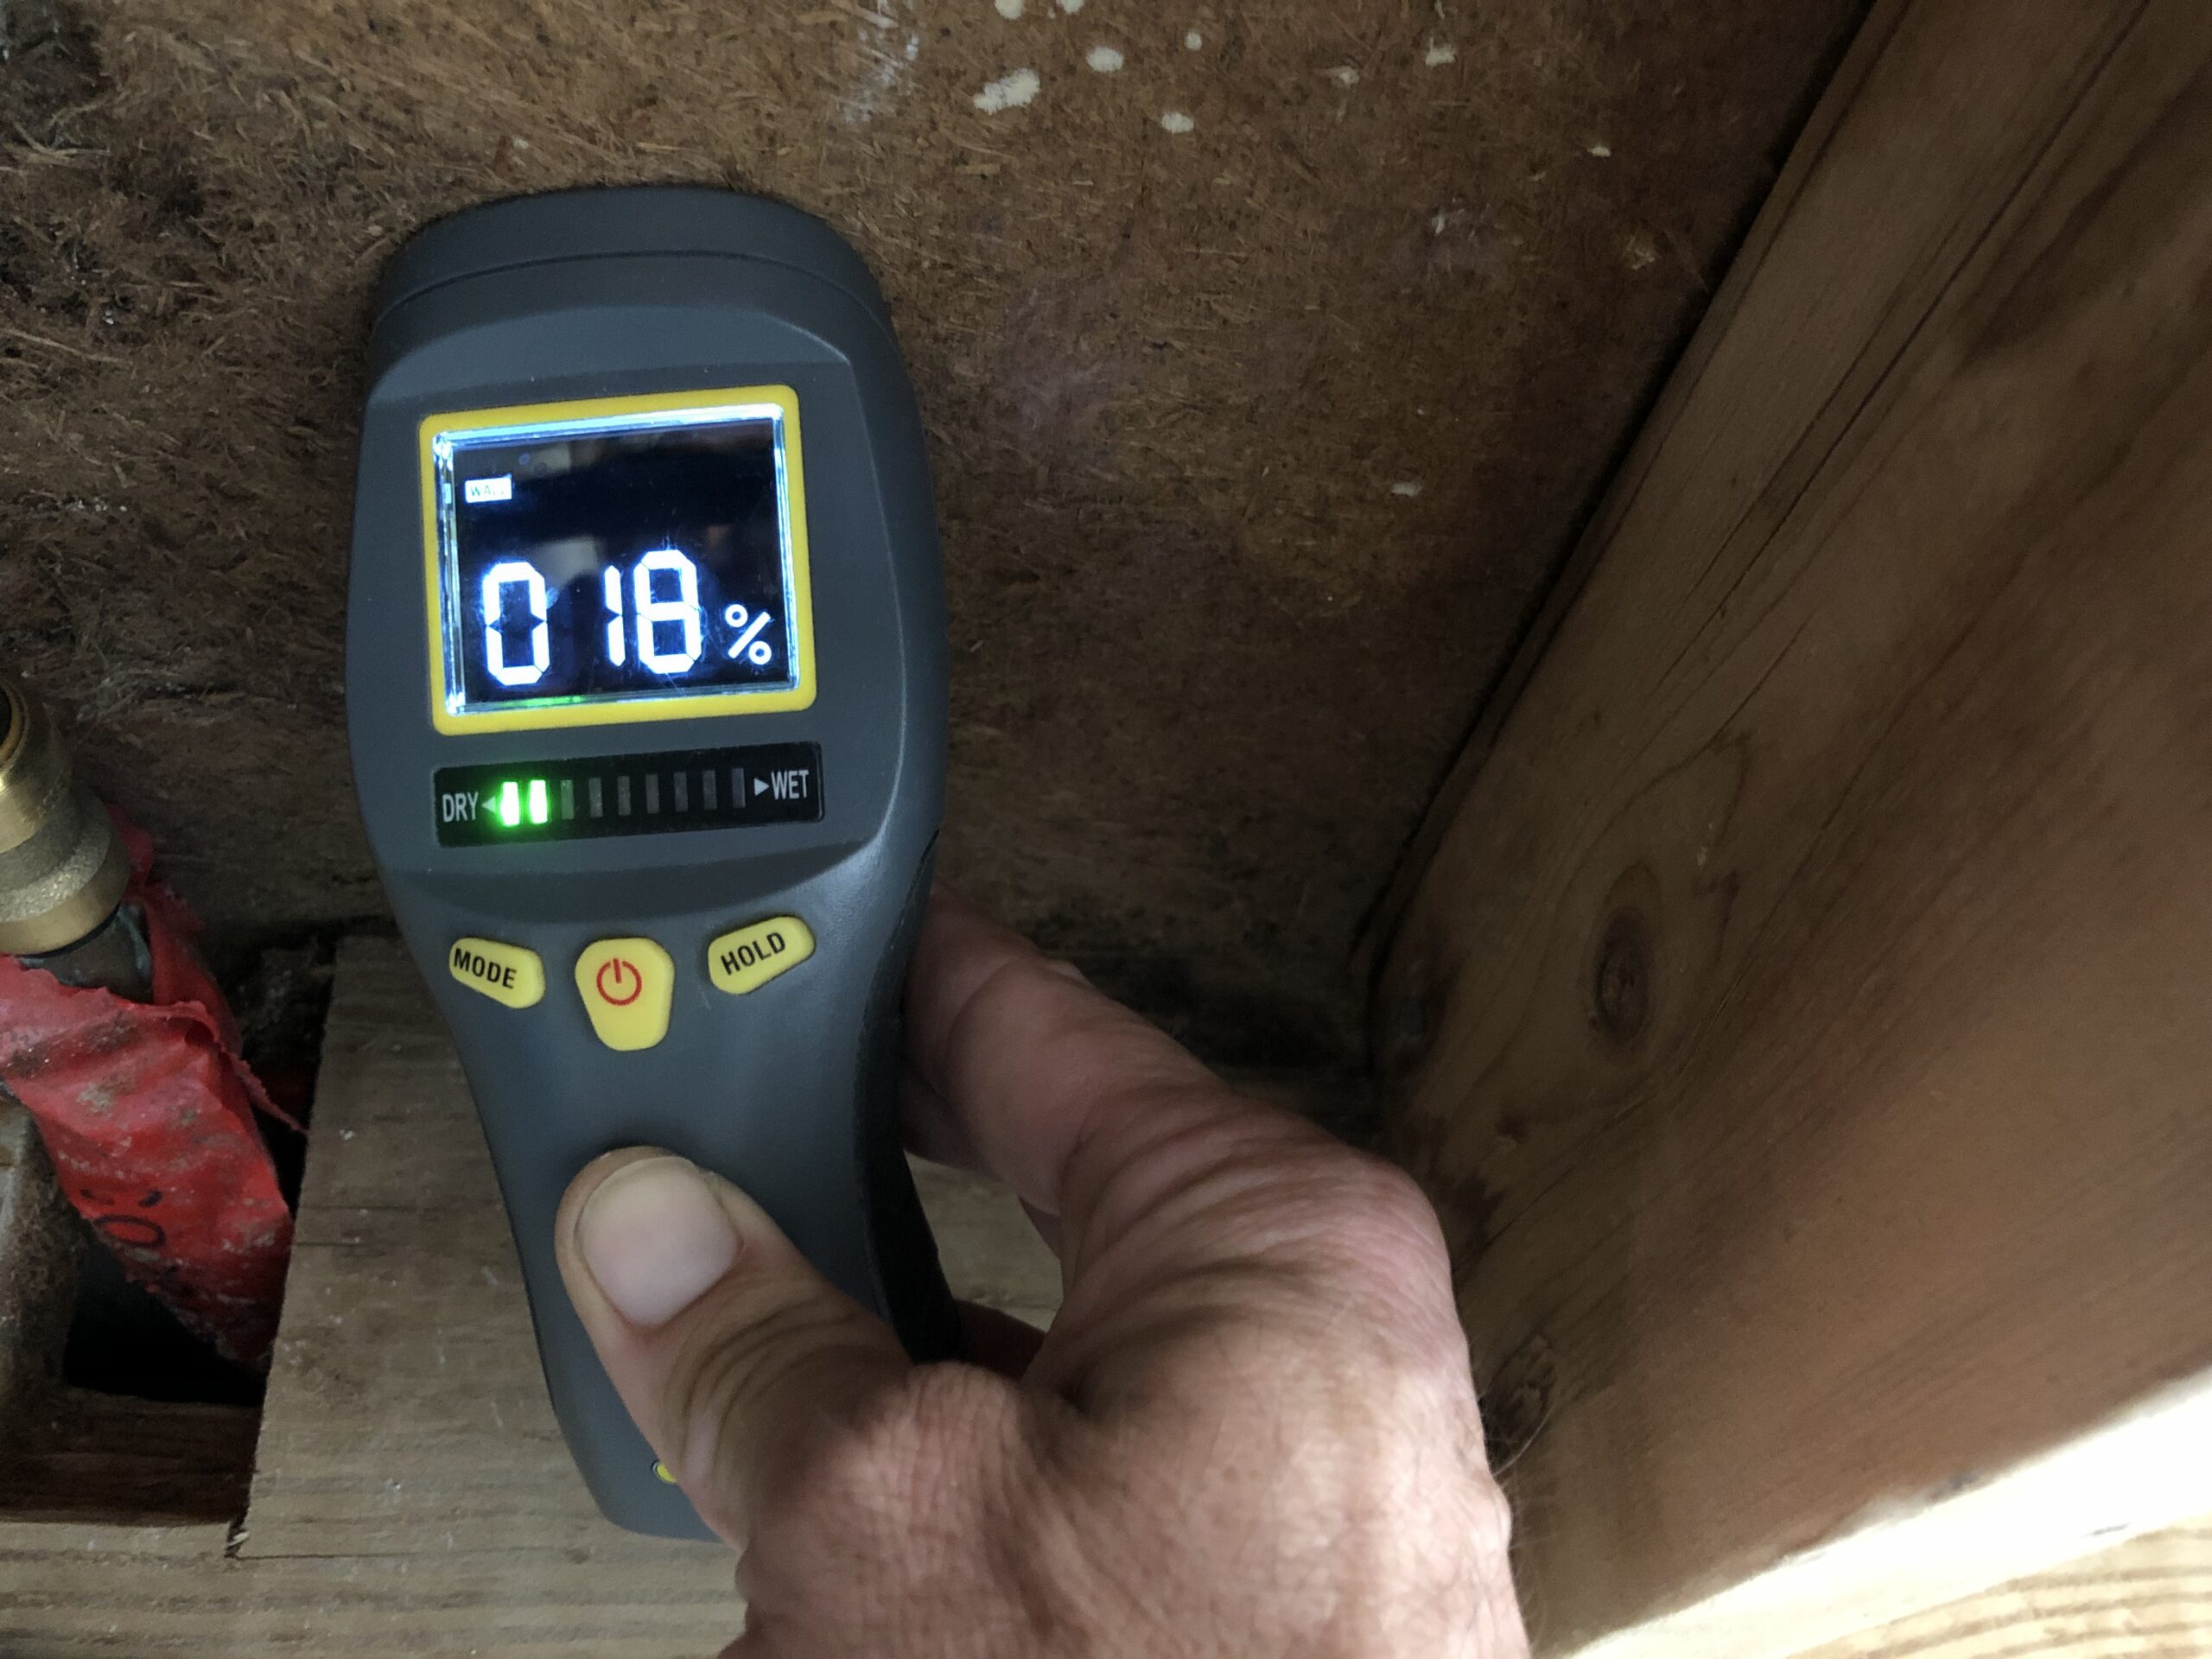 moisture meter being used to detect moisture in construction materials.